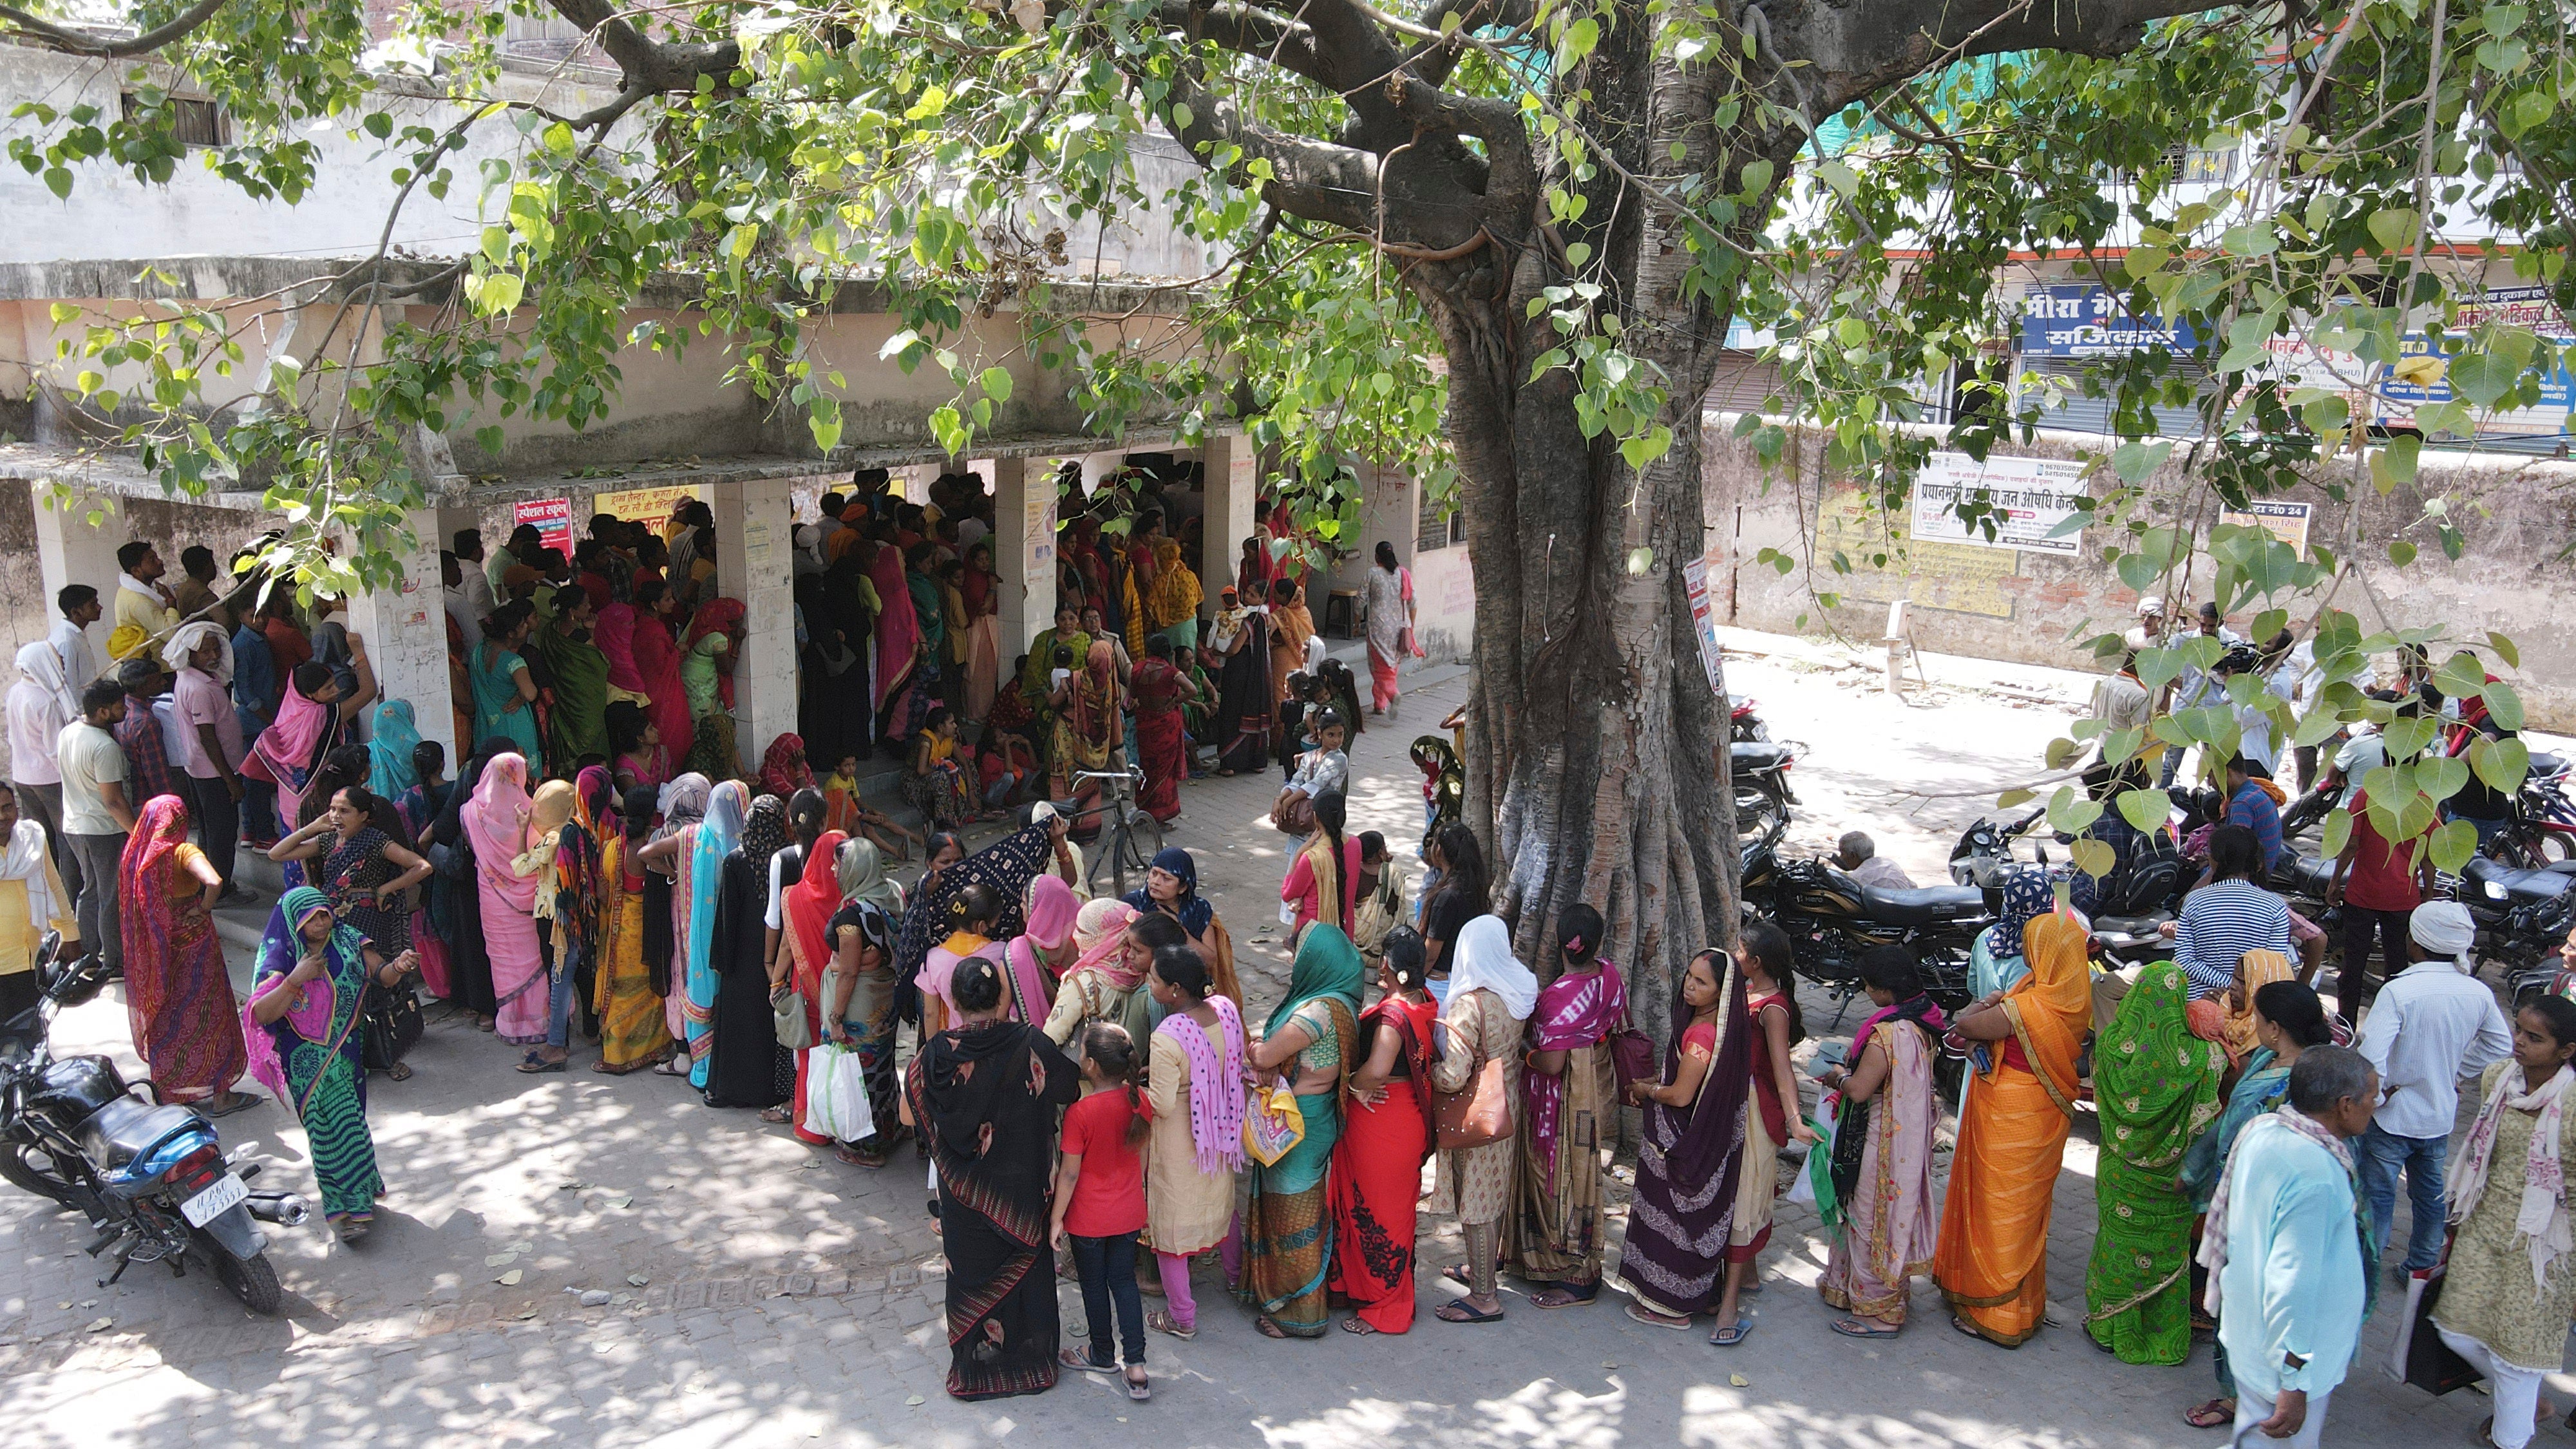 People stand in queue to register outside district hospital in Ballia, Uttar Pradesh state in India on a hot day in June amid a deadly heatwave